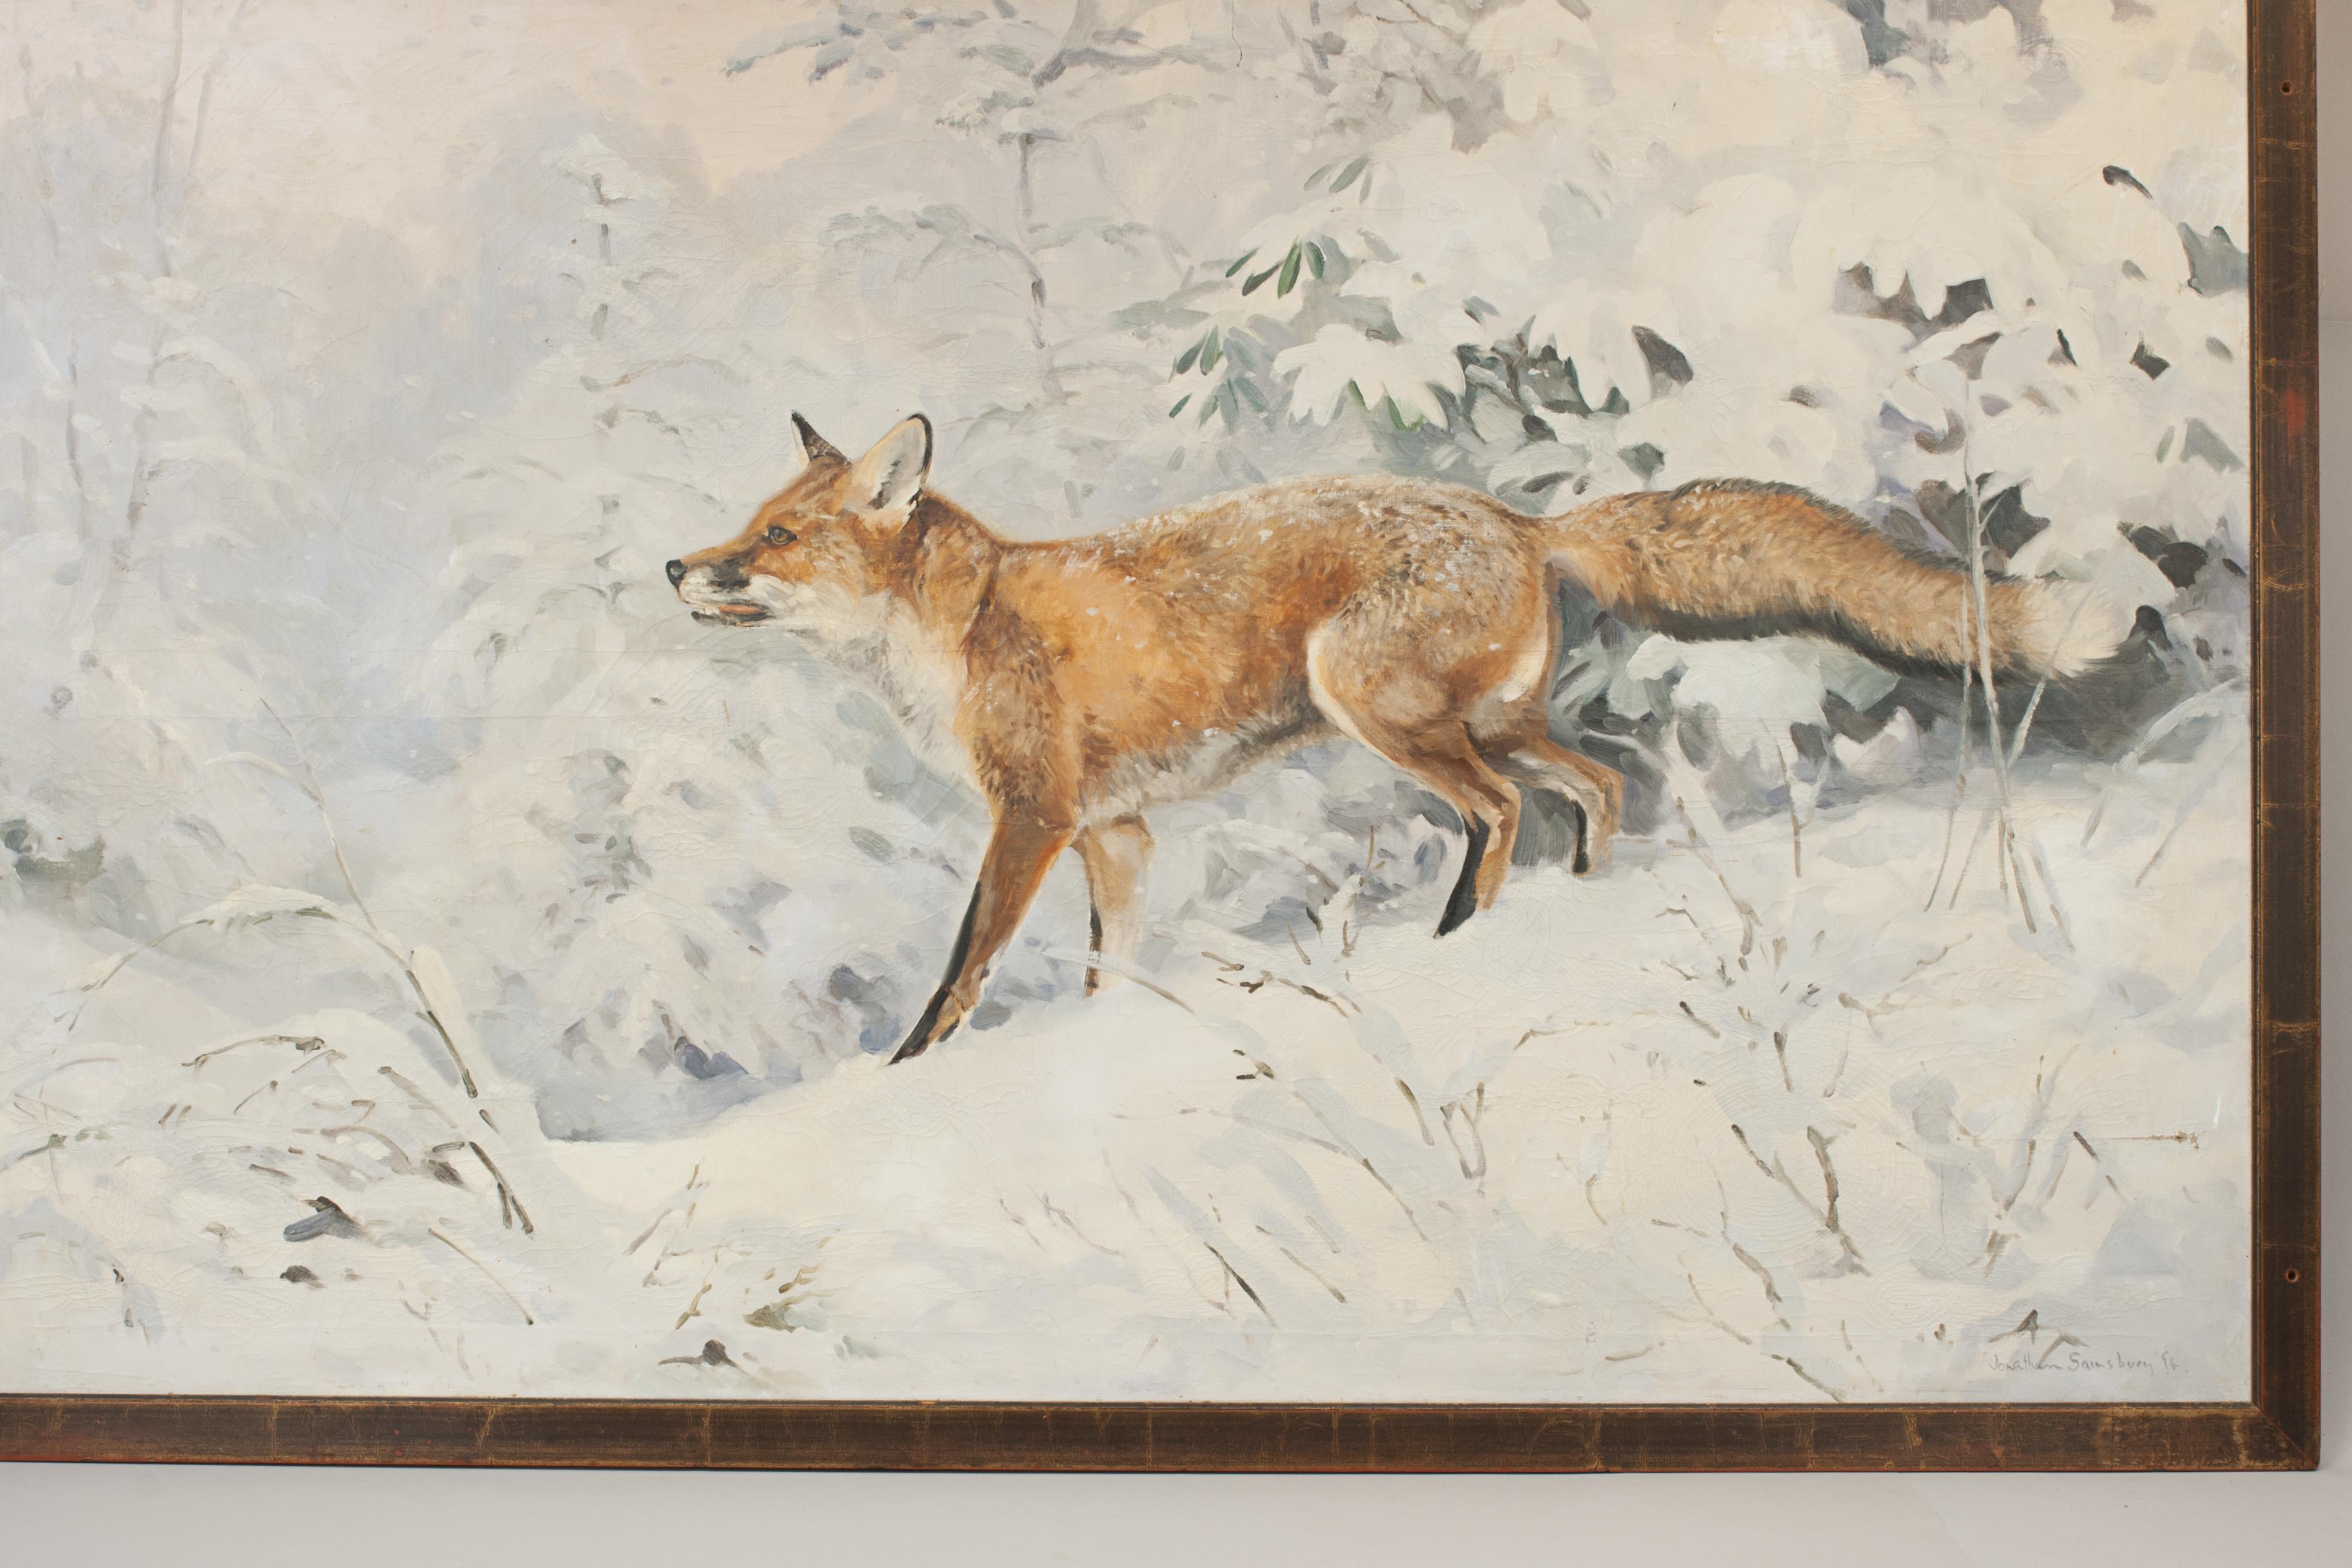 Sporting Art Painting of a Fox in Winter Landscape by Jonathan Sainsbury